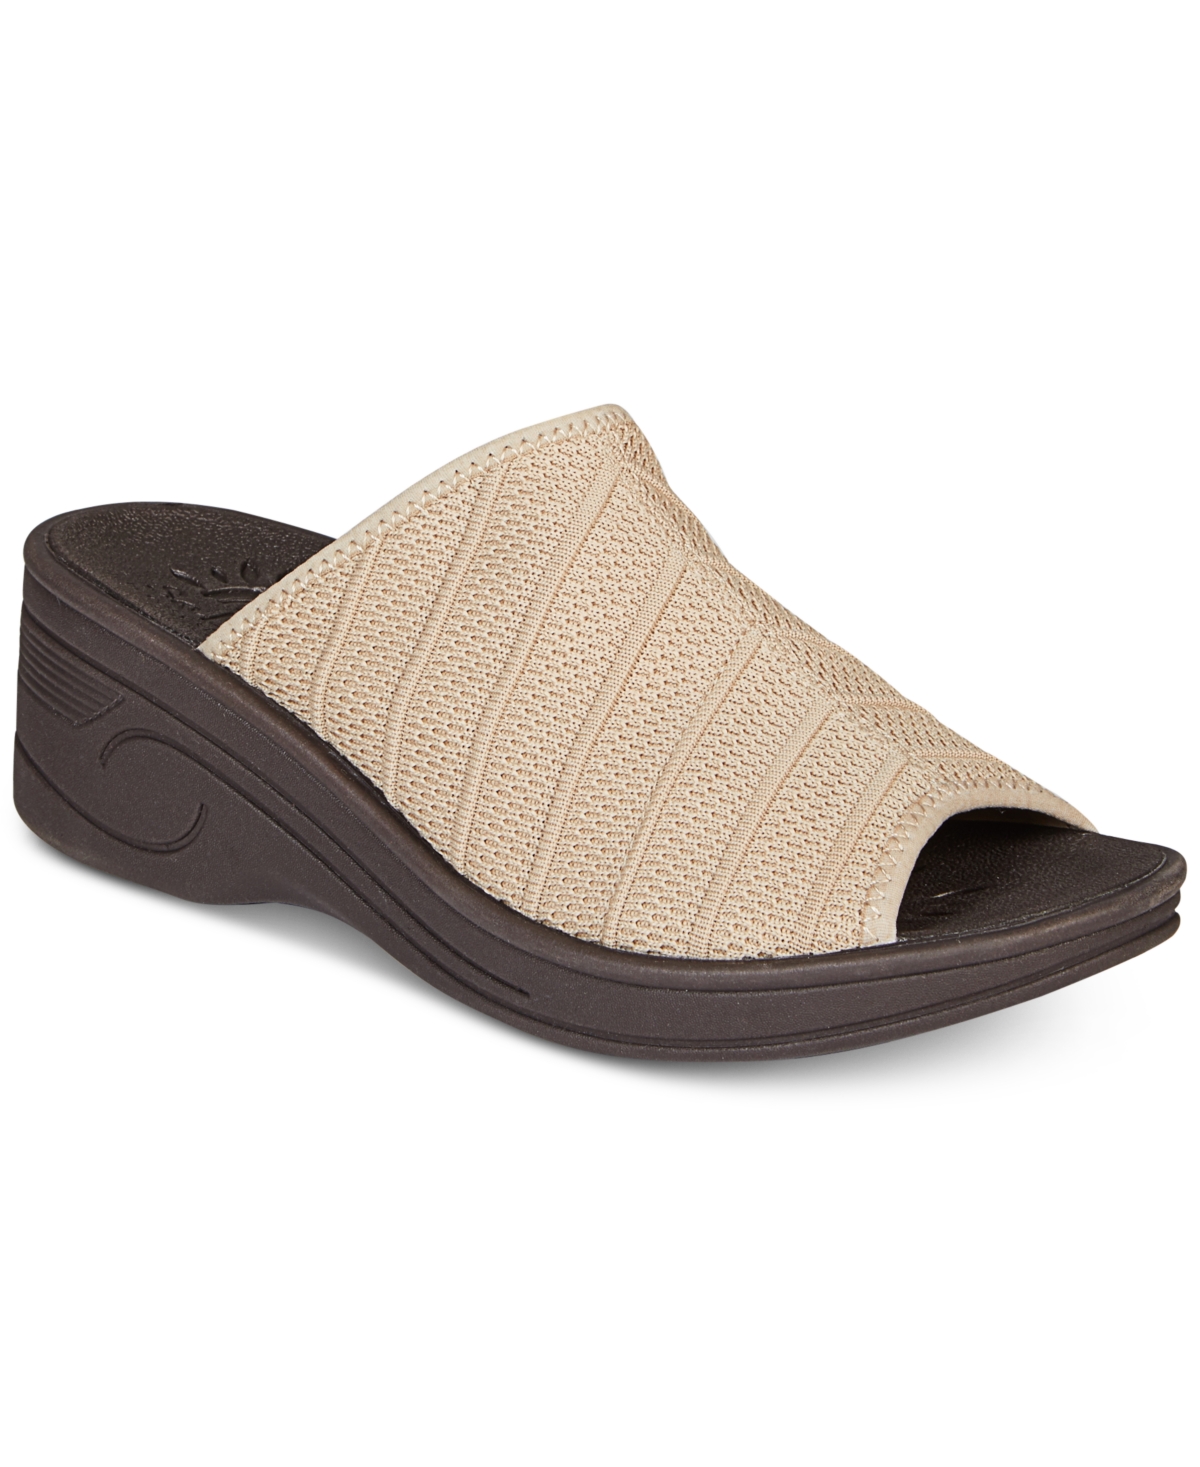 EASY STREET SOLITE AIRY SLIDE SANDALS WOMEN'S SHOES